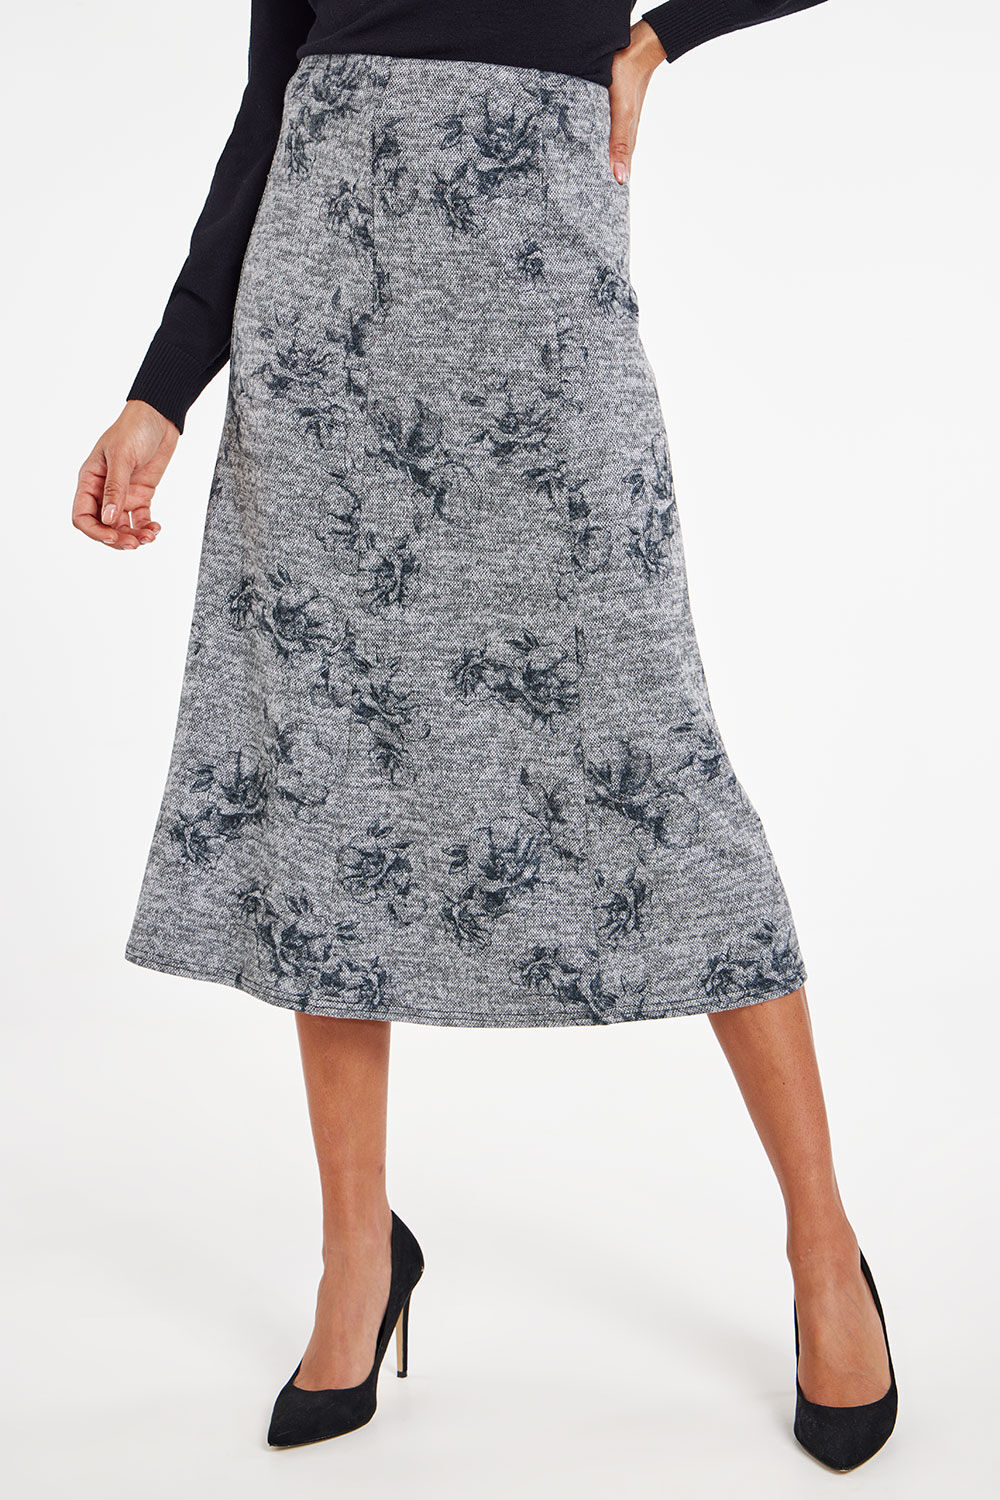 Bonmarche Grey Floral Soft Touch Elasticated Skirt, Size: 18